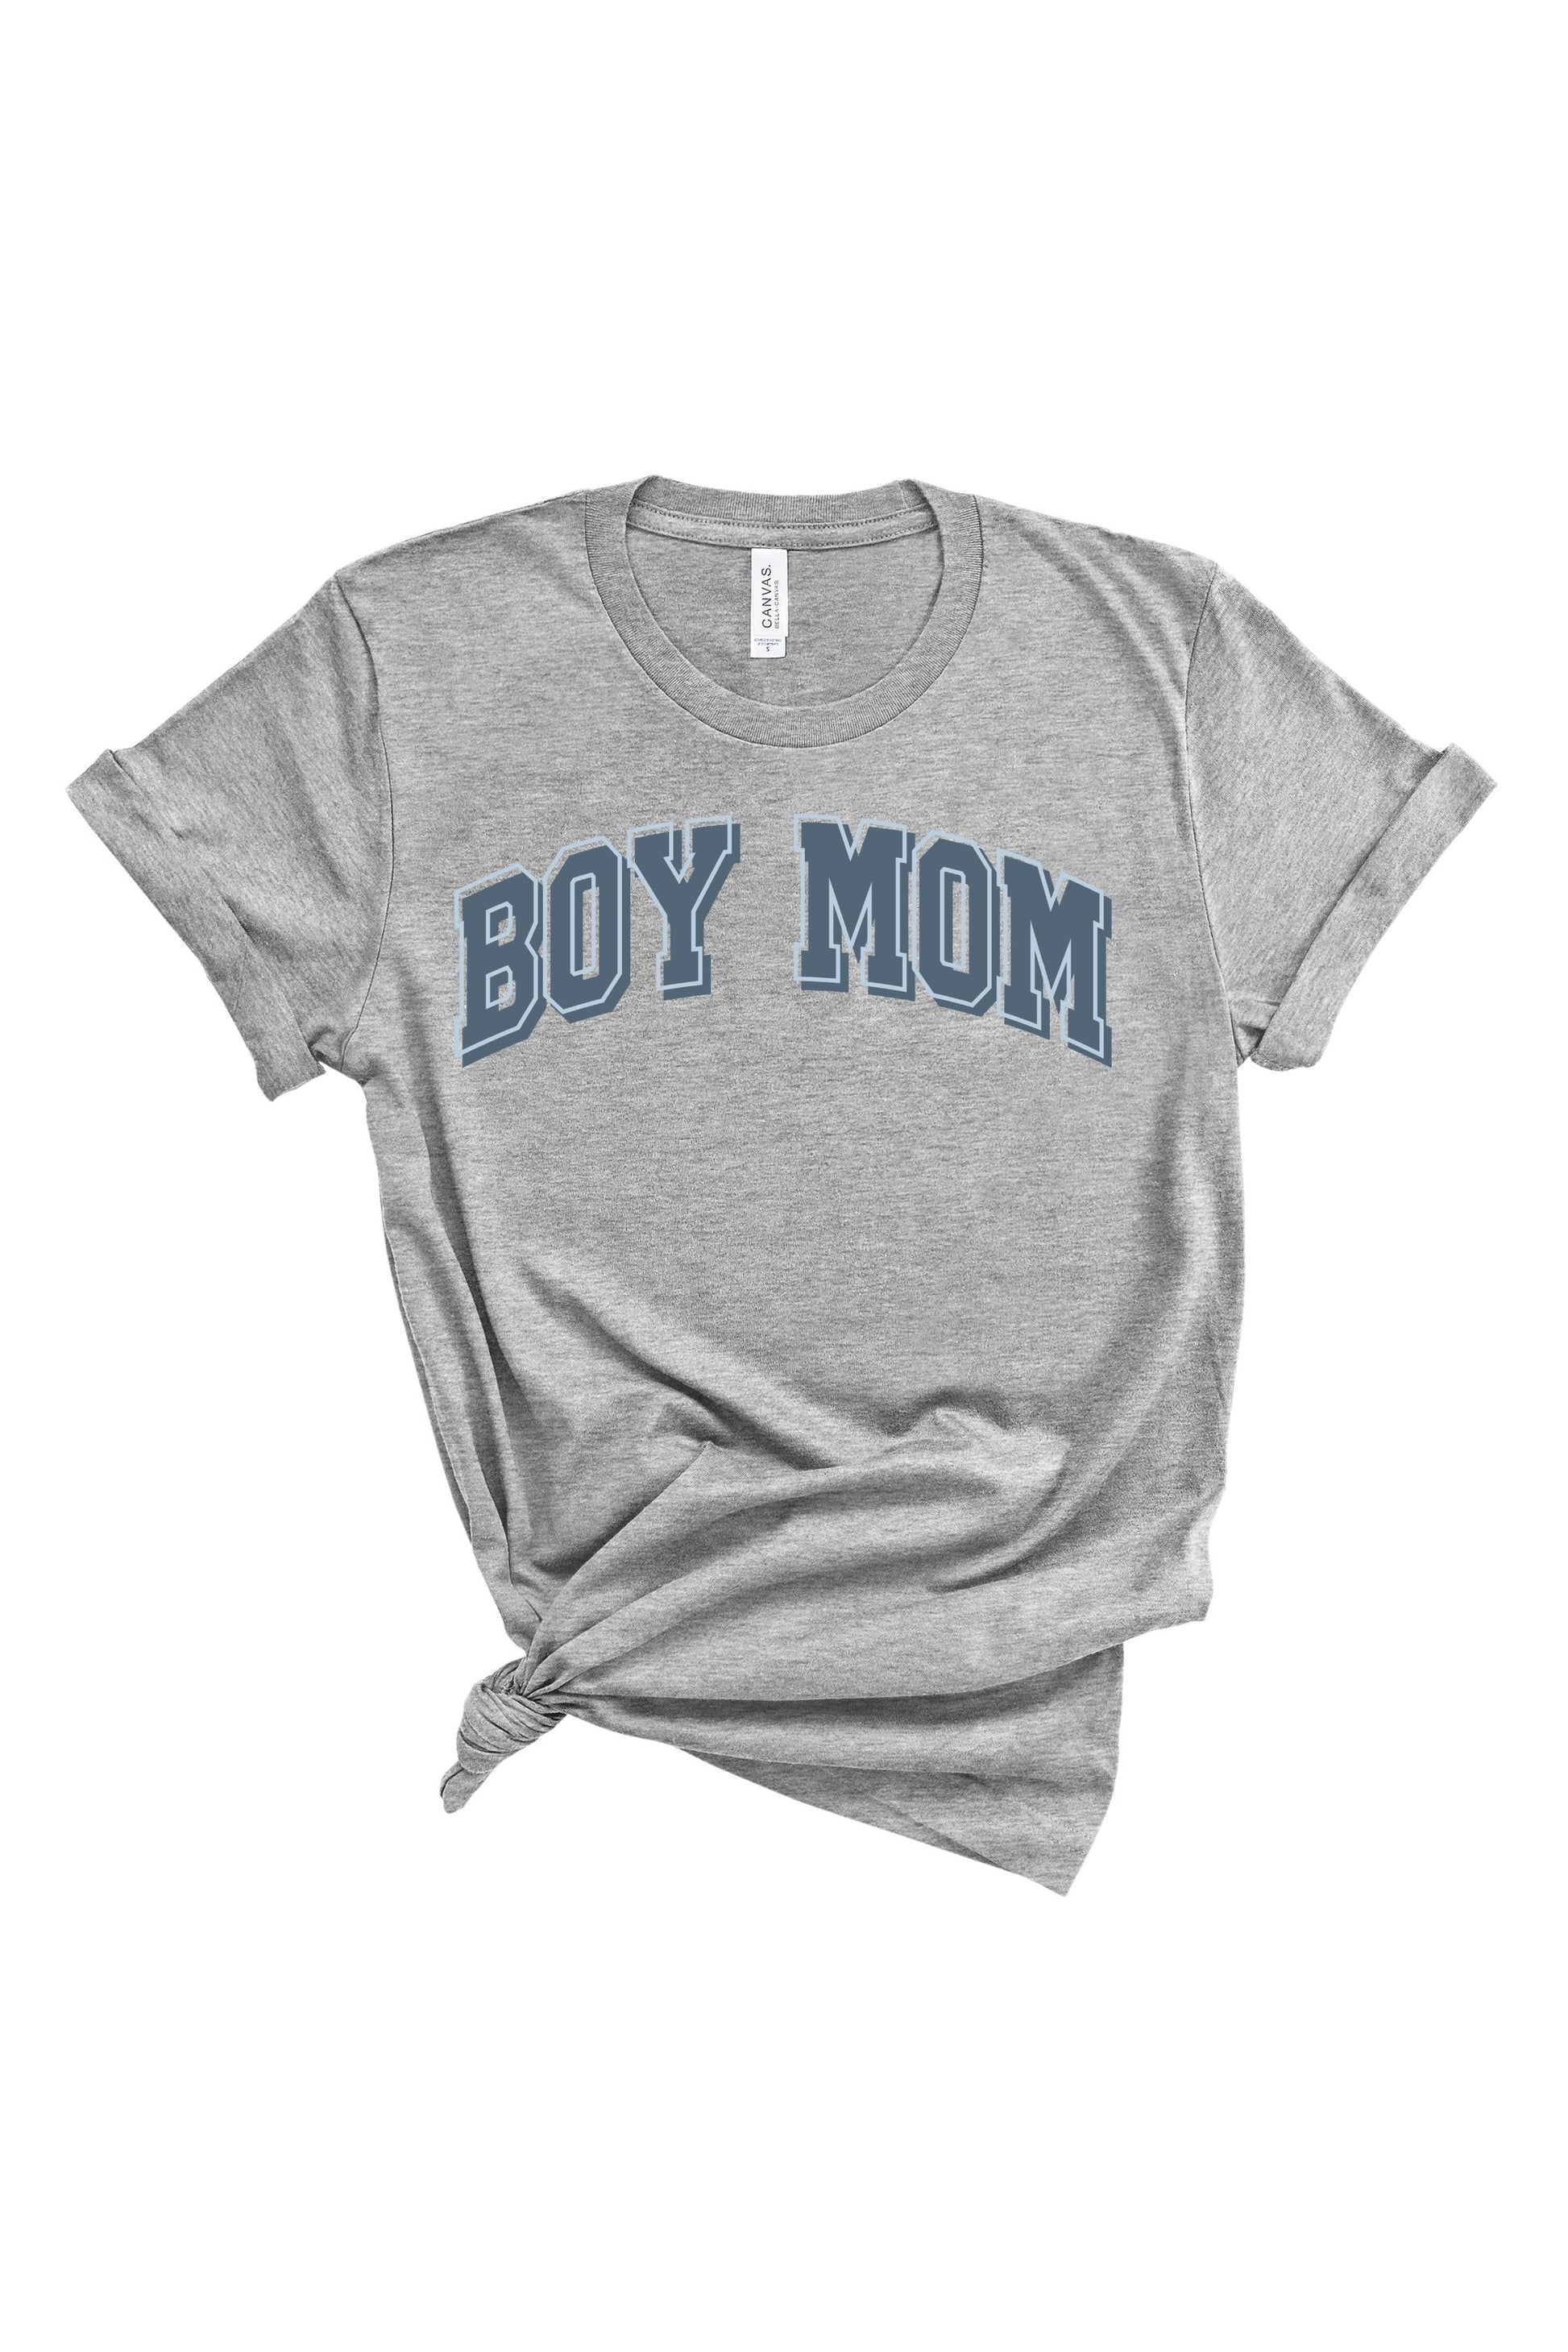 Boy Mom | Tee | Adults-Sister Shirts-Sister Shirts, Cute & Custom Tees for Mama & Littles in Trussville, Alabama.